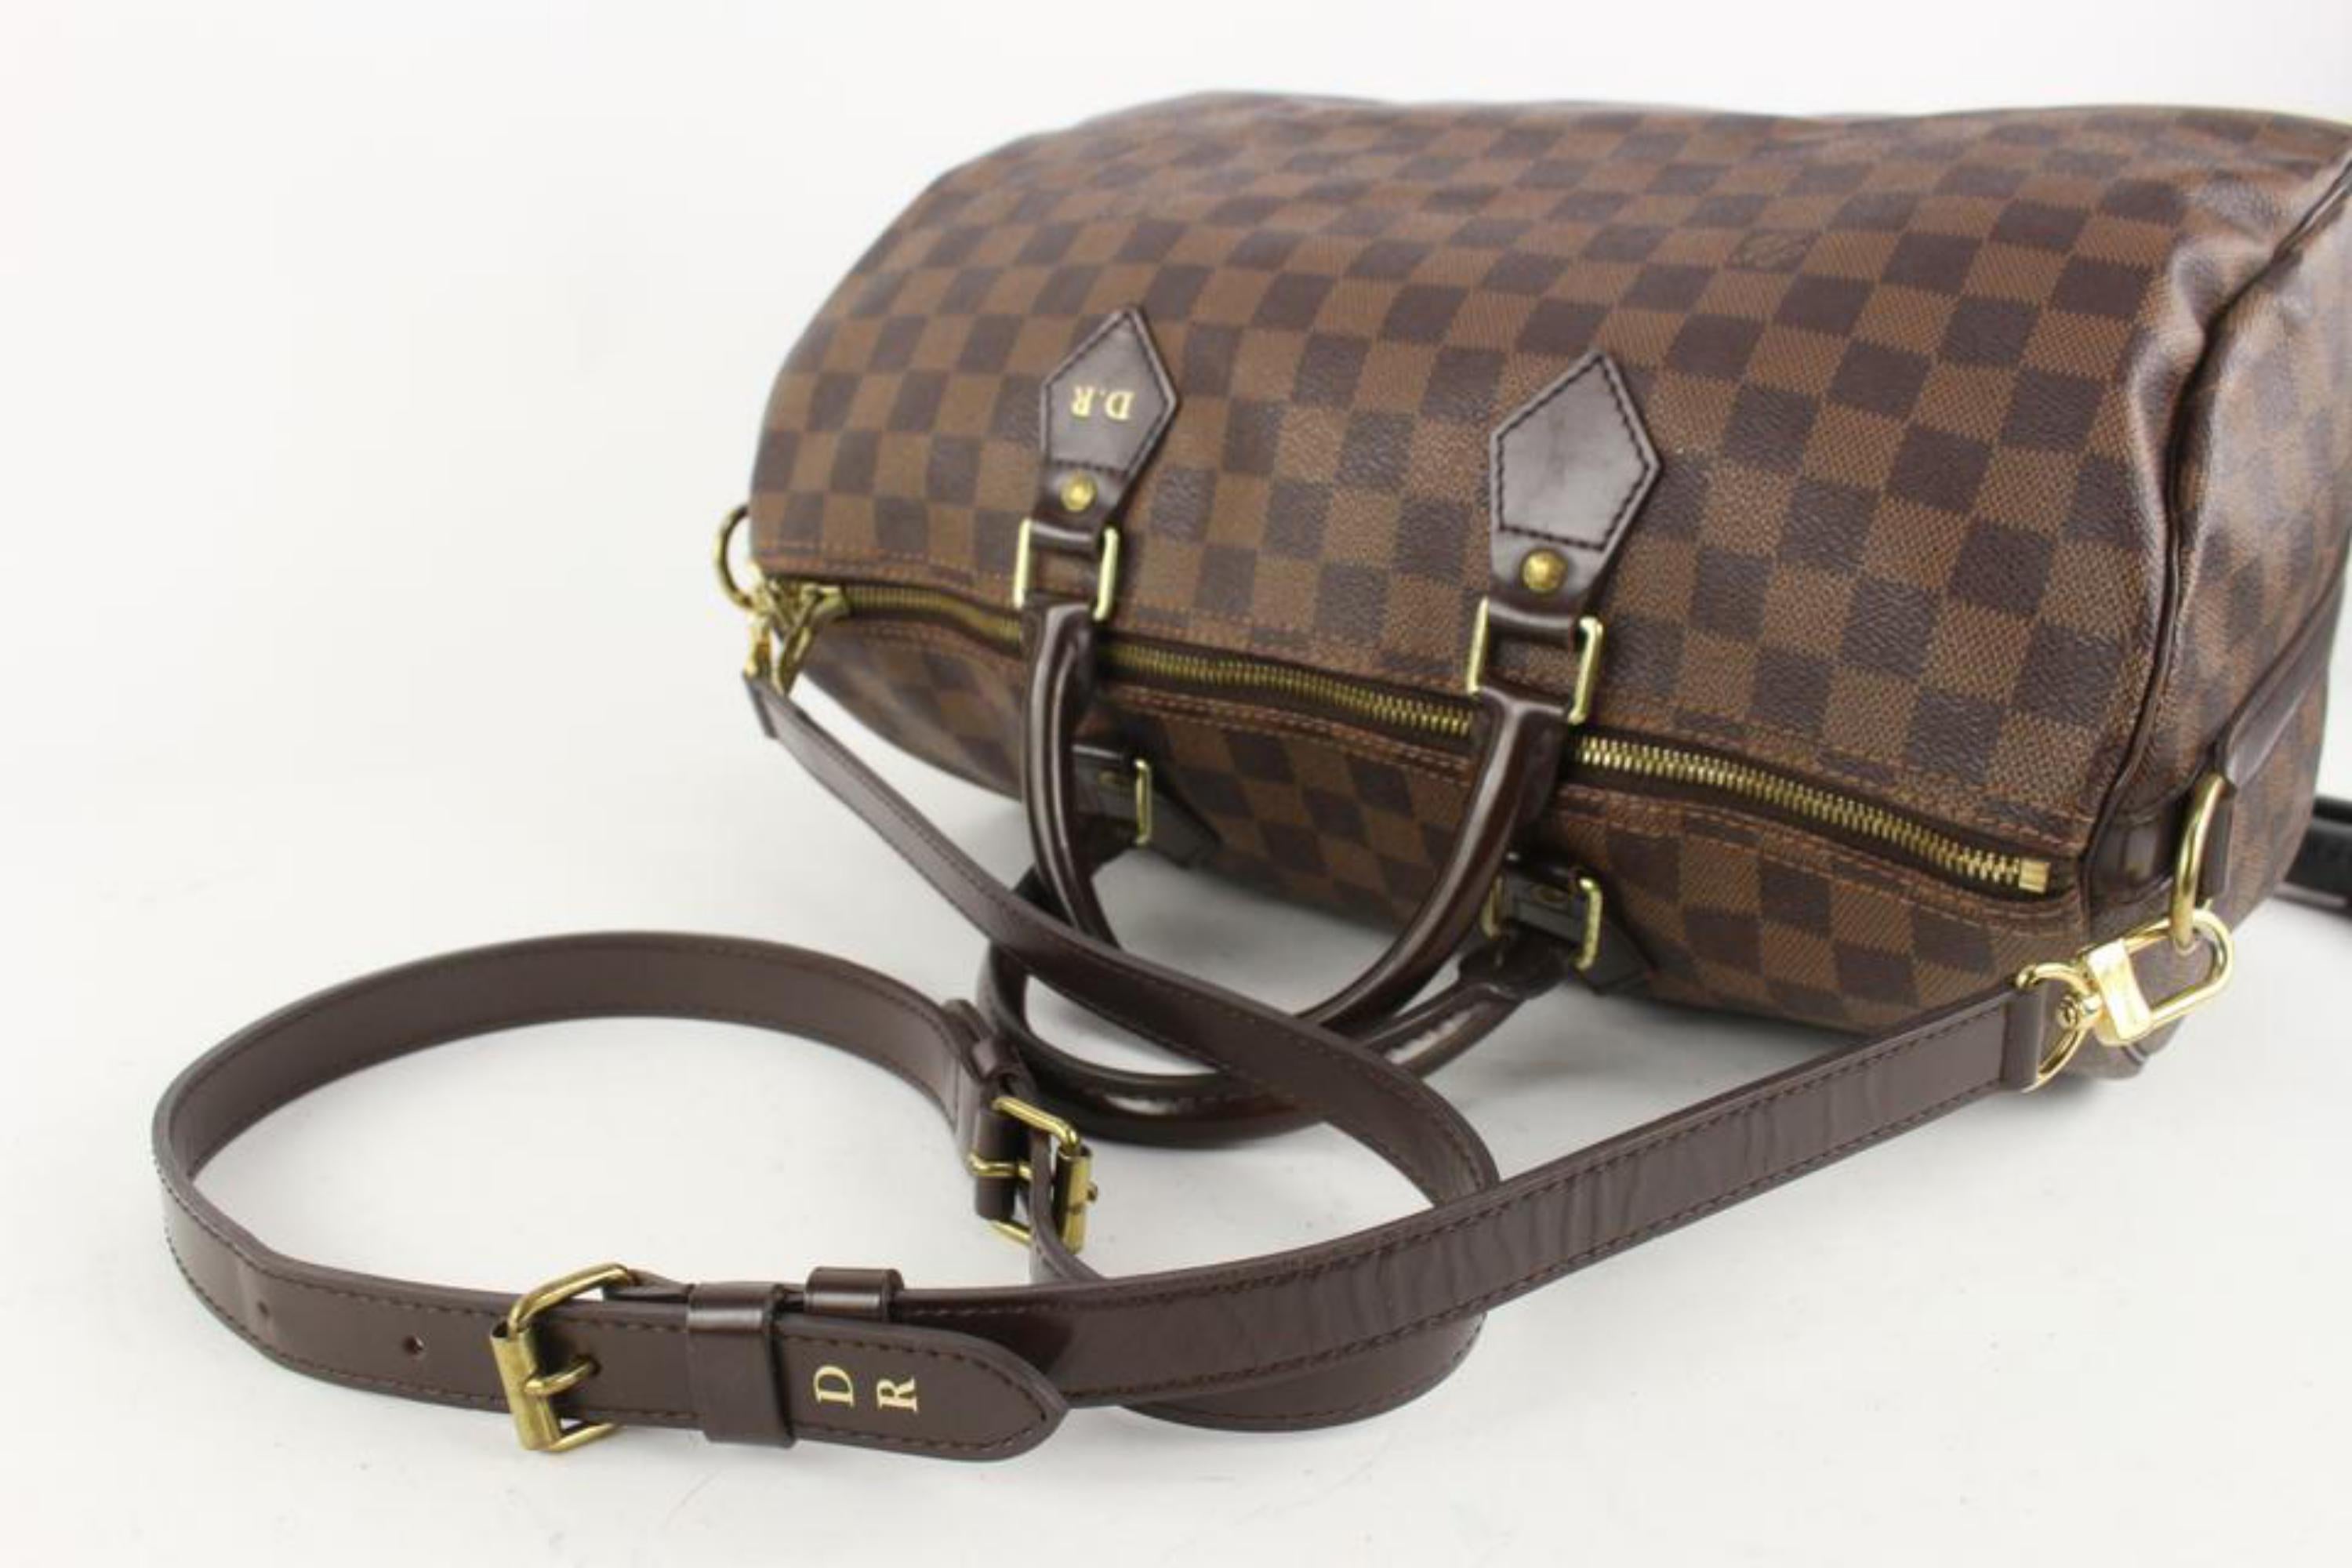 Louis Vuitton Damier Ebene Speedy Bandouliere 35 with Strap 112lv21 For Sale 7